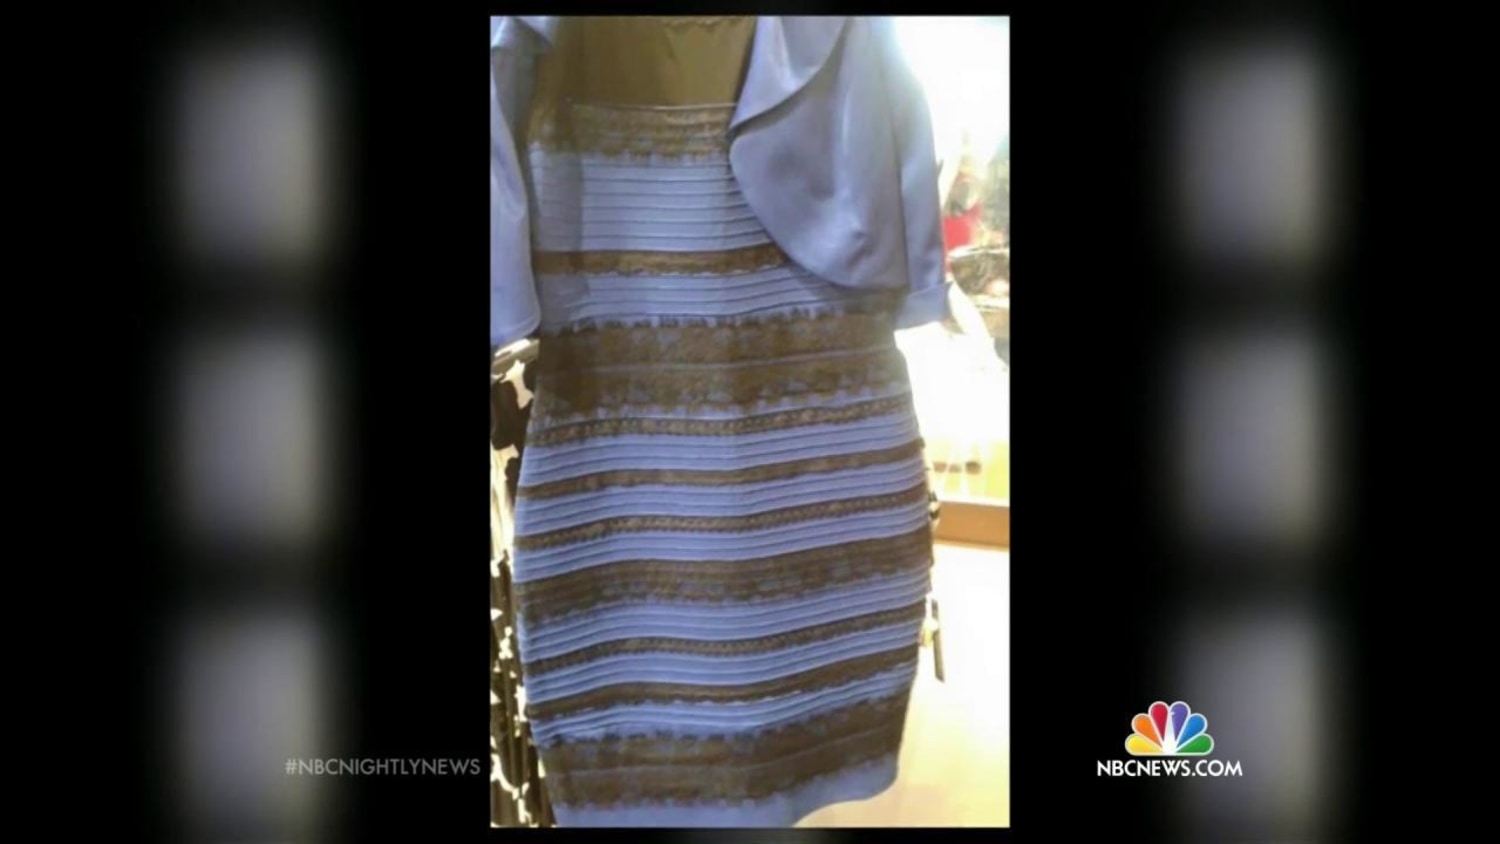 The dress: Celebrities join the white and gold or blue and black